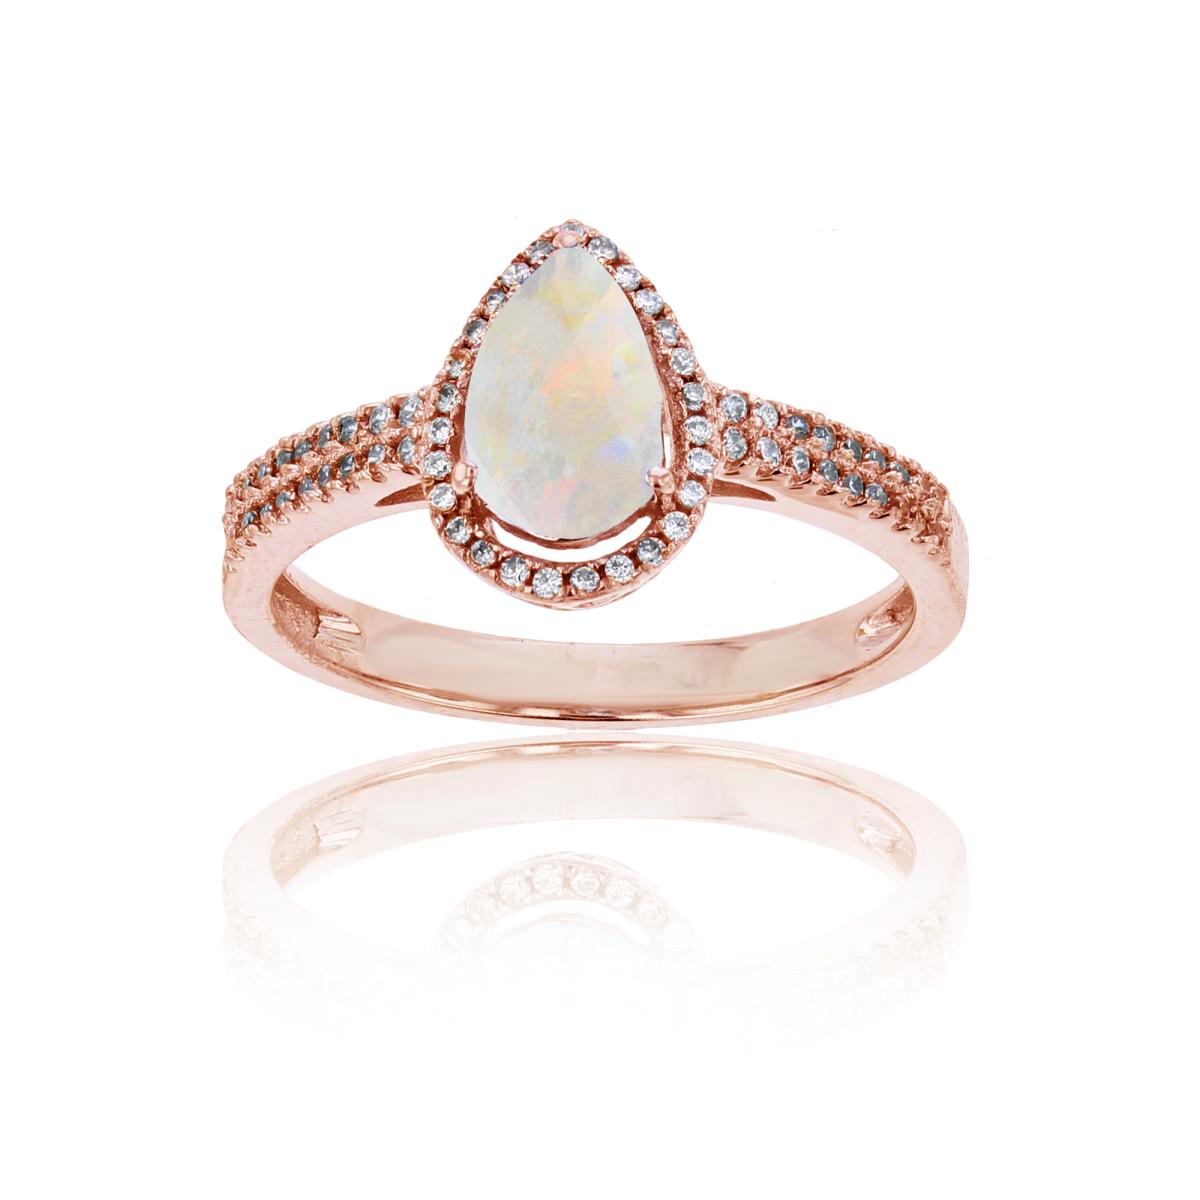 14K Rose Gold 0.20 CTTW Round Diamond & 8x5mm Pear Cut Opal Halo Ring